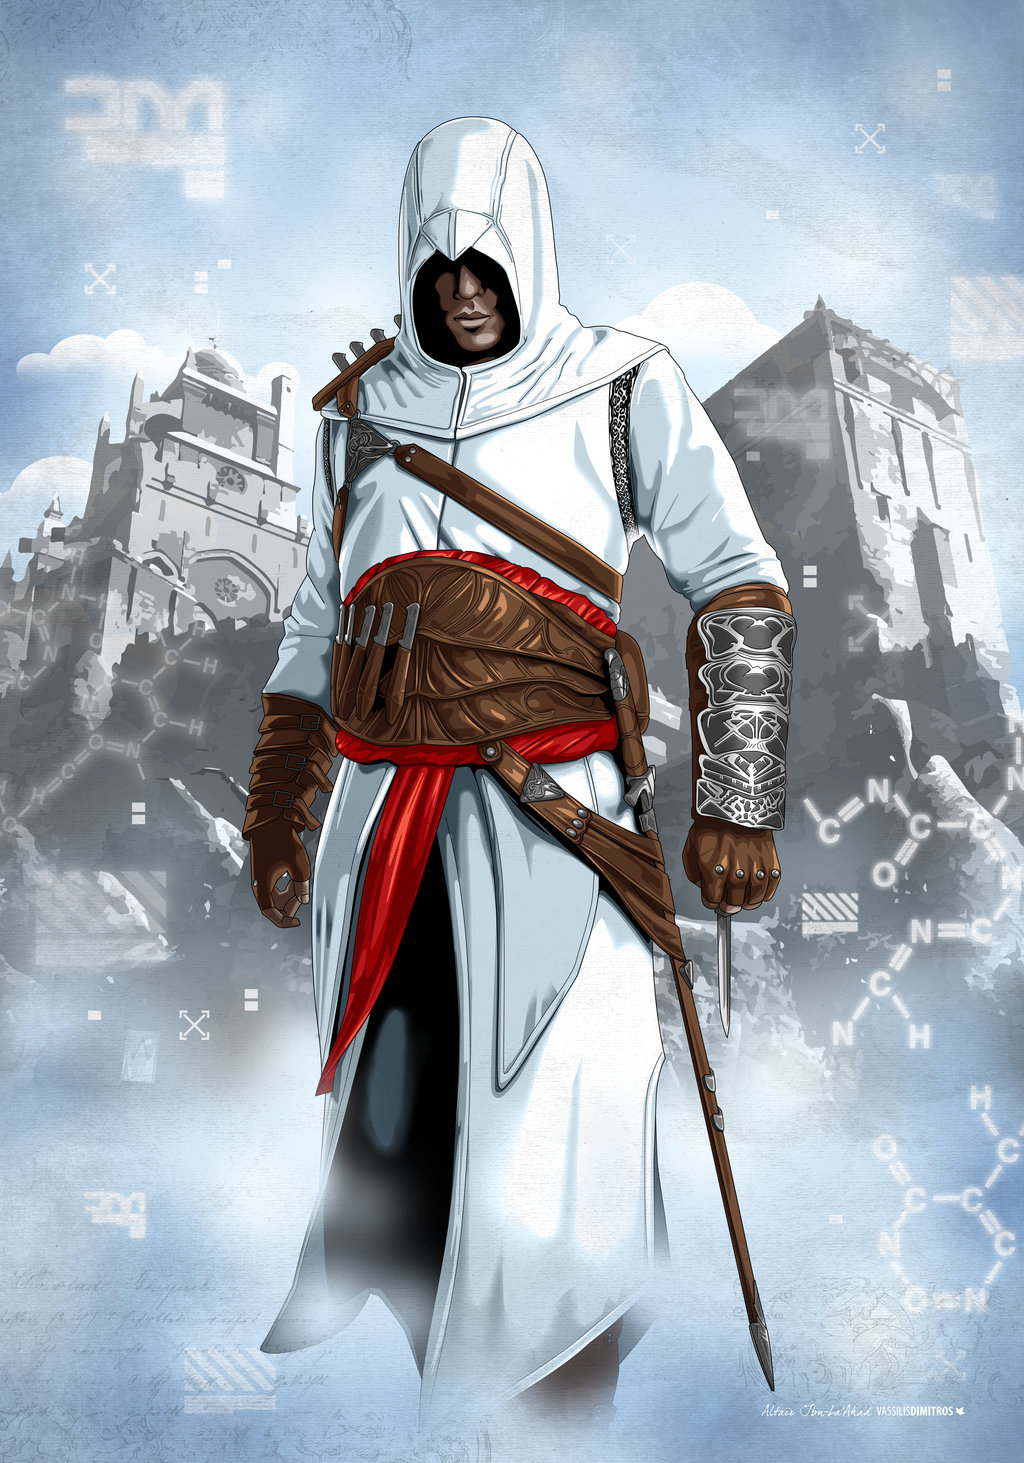 Imagem Altair Ibn La Ahad Masyaf 1189 By Dimitrosw D6415w2 Assassin S Creed Wiki